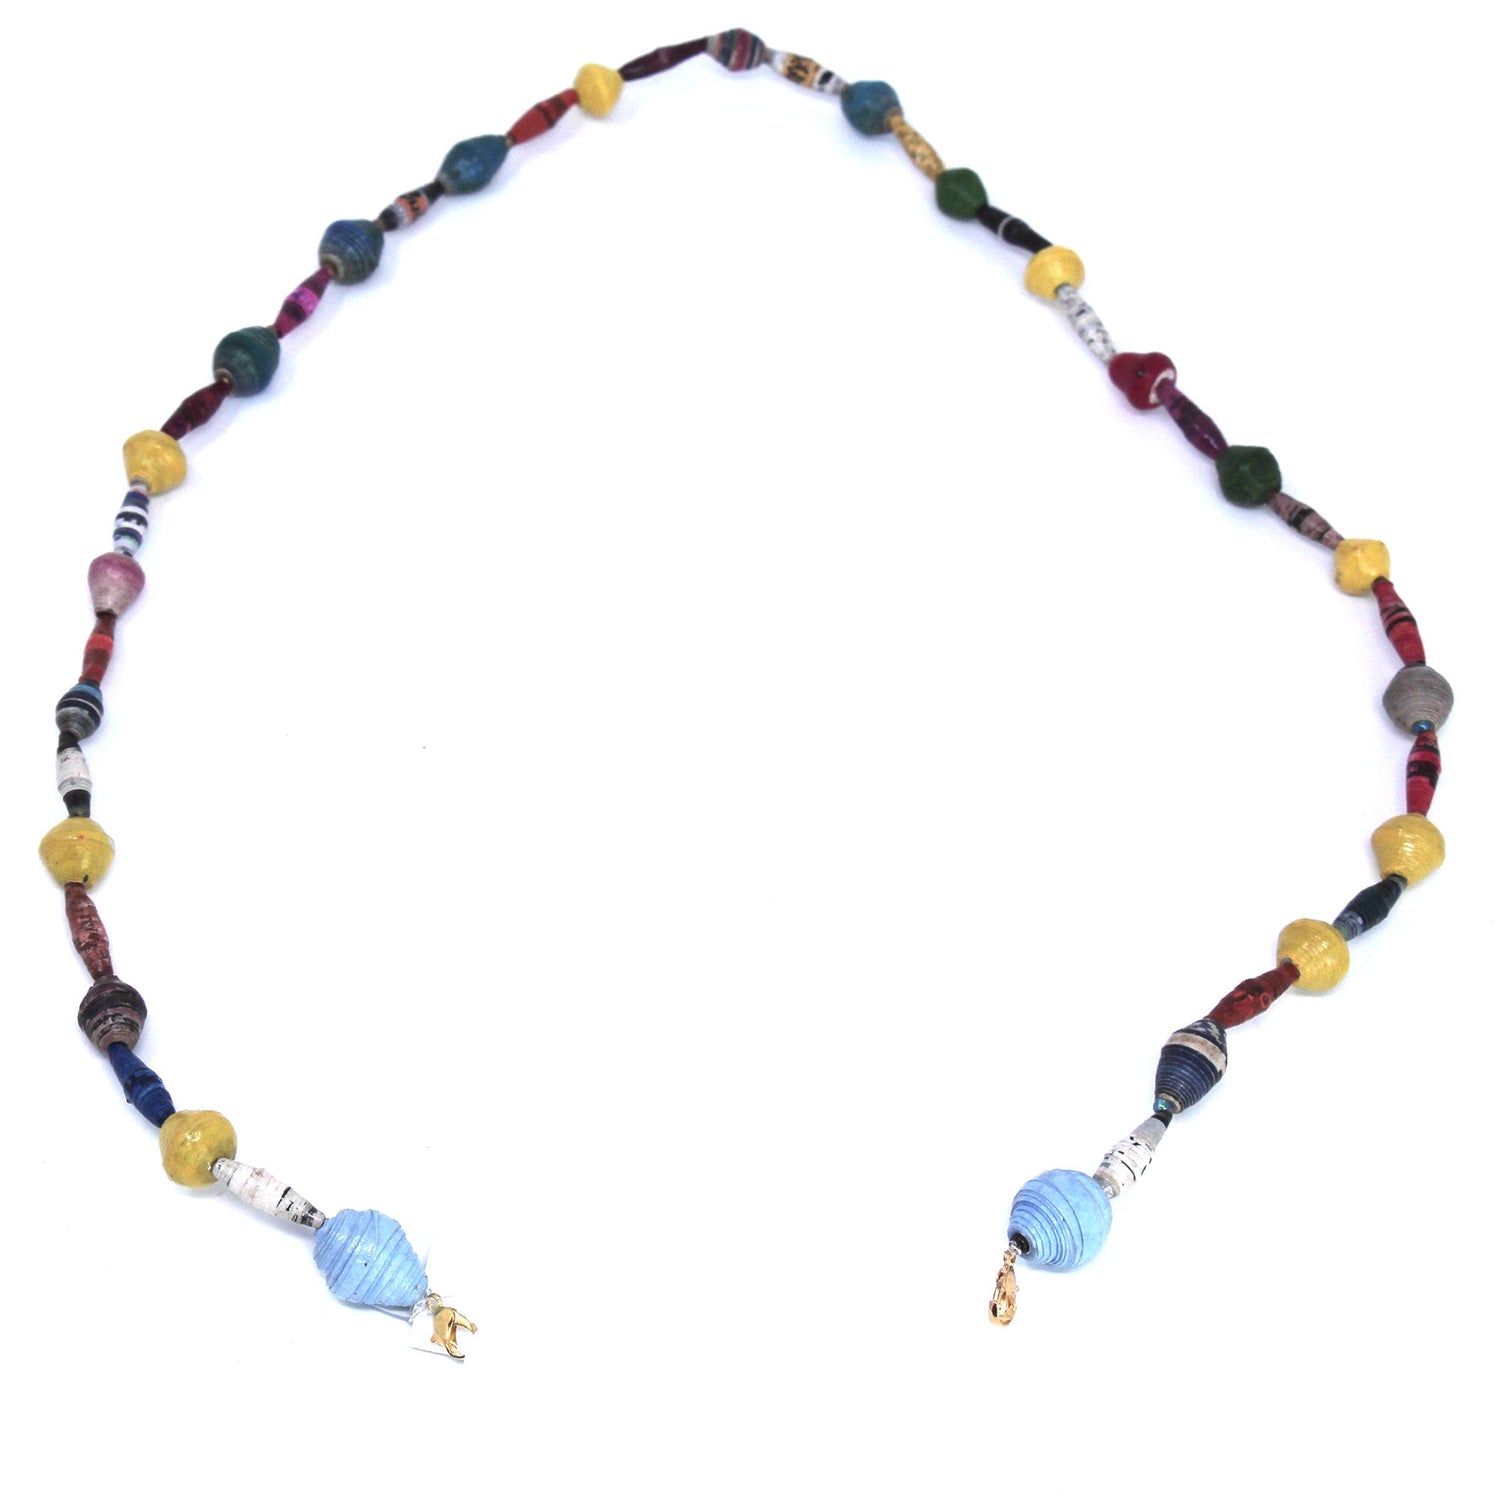 face-mask-eyeglass-paper-bead-chain-colorful-mixed-shapes-2